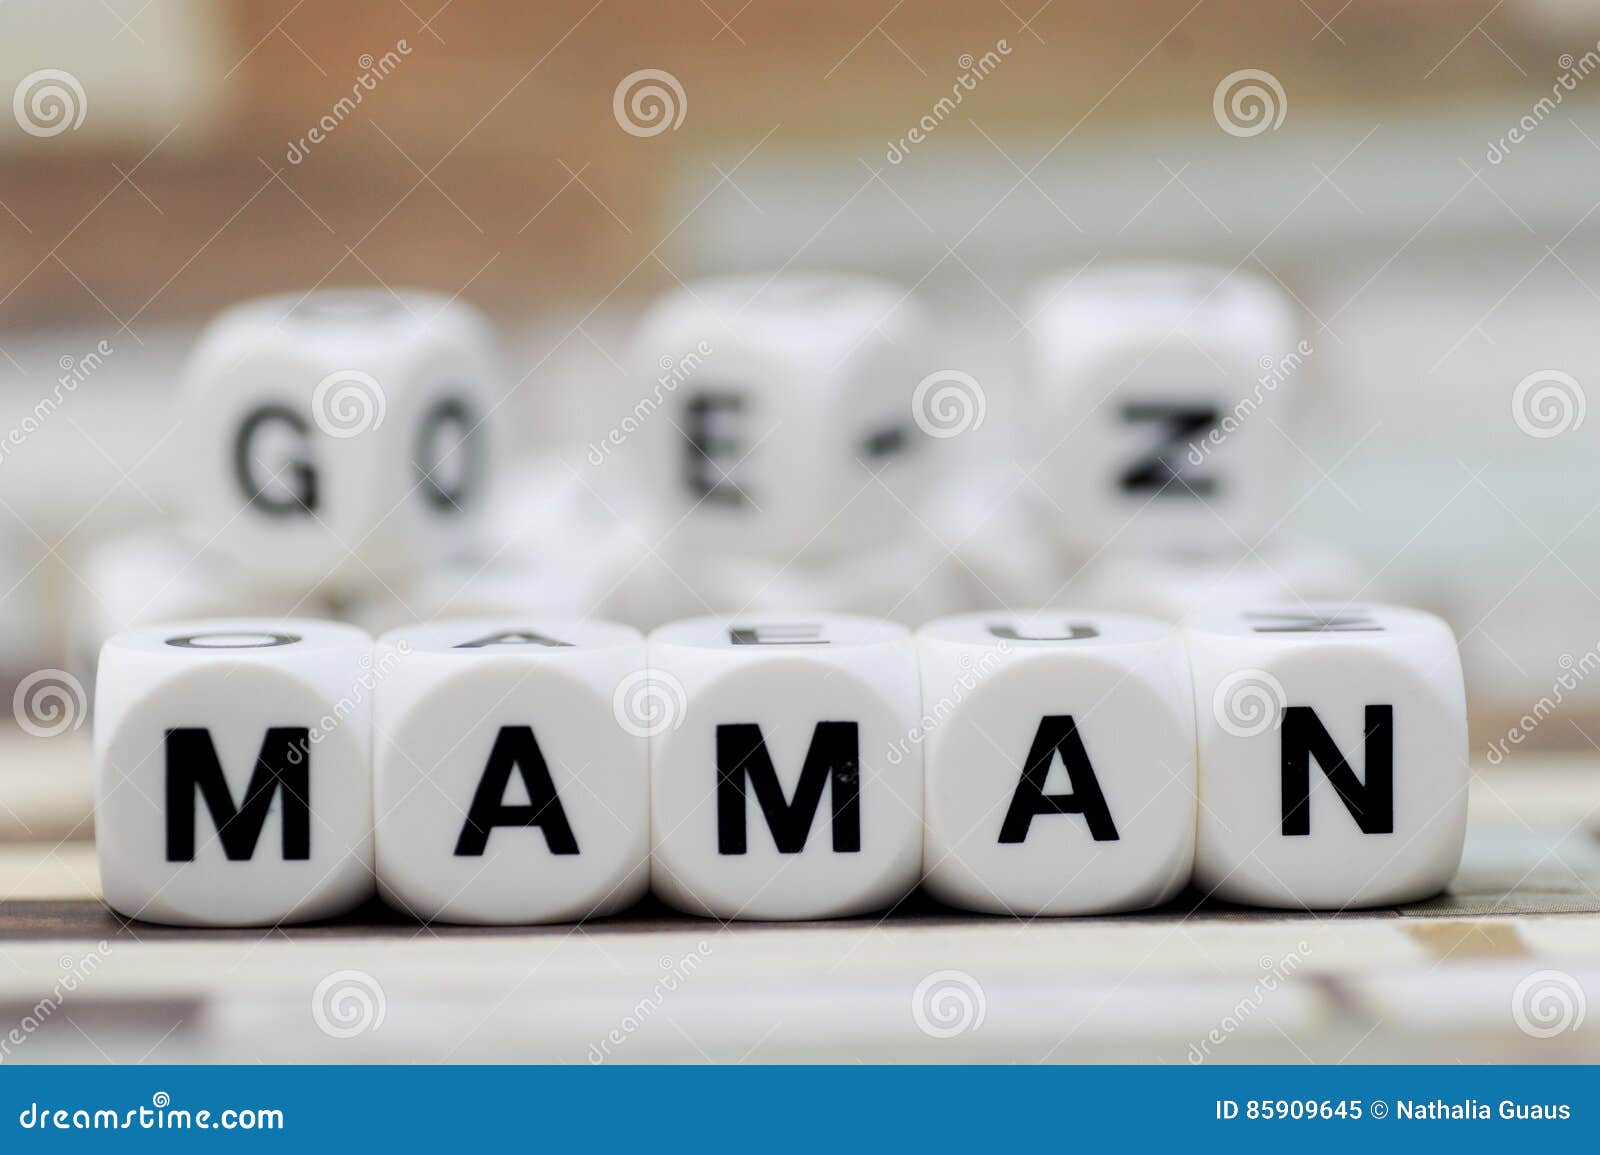 maman, dice letters